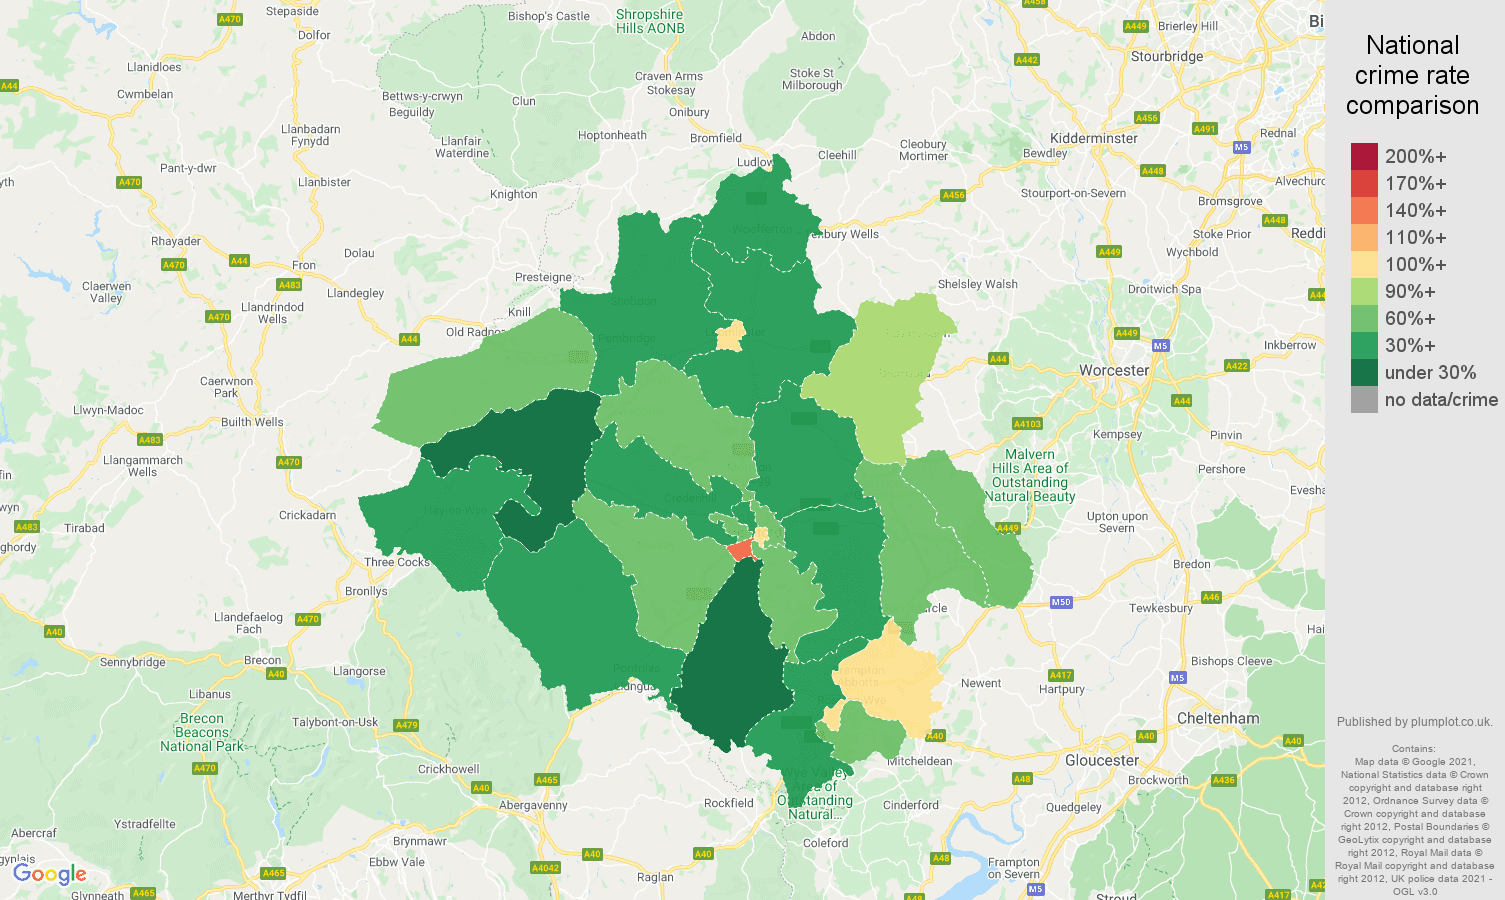 Herefordshire criminal damage and arson crime rate comparison map